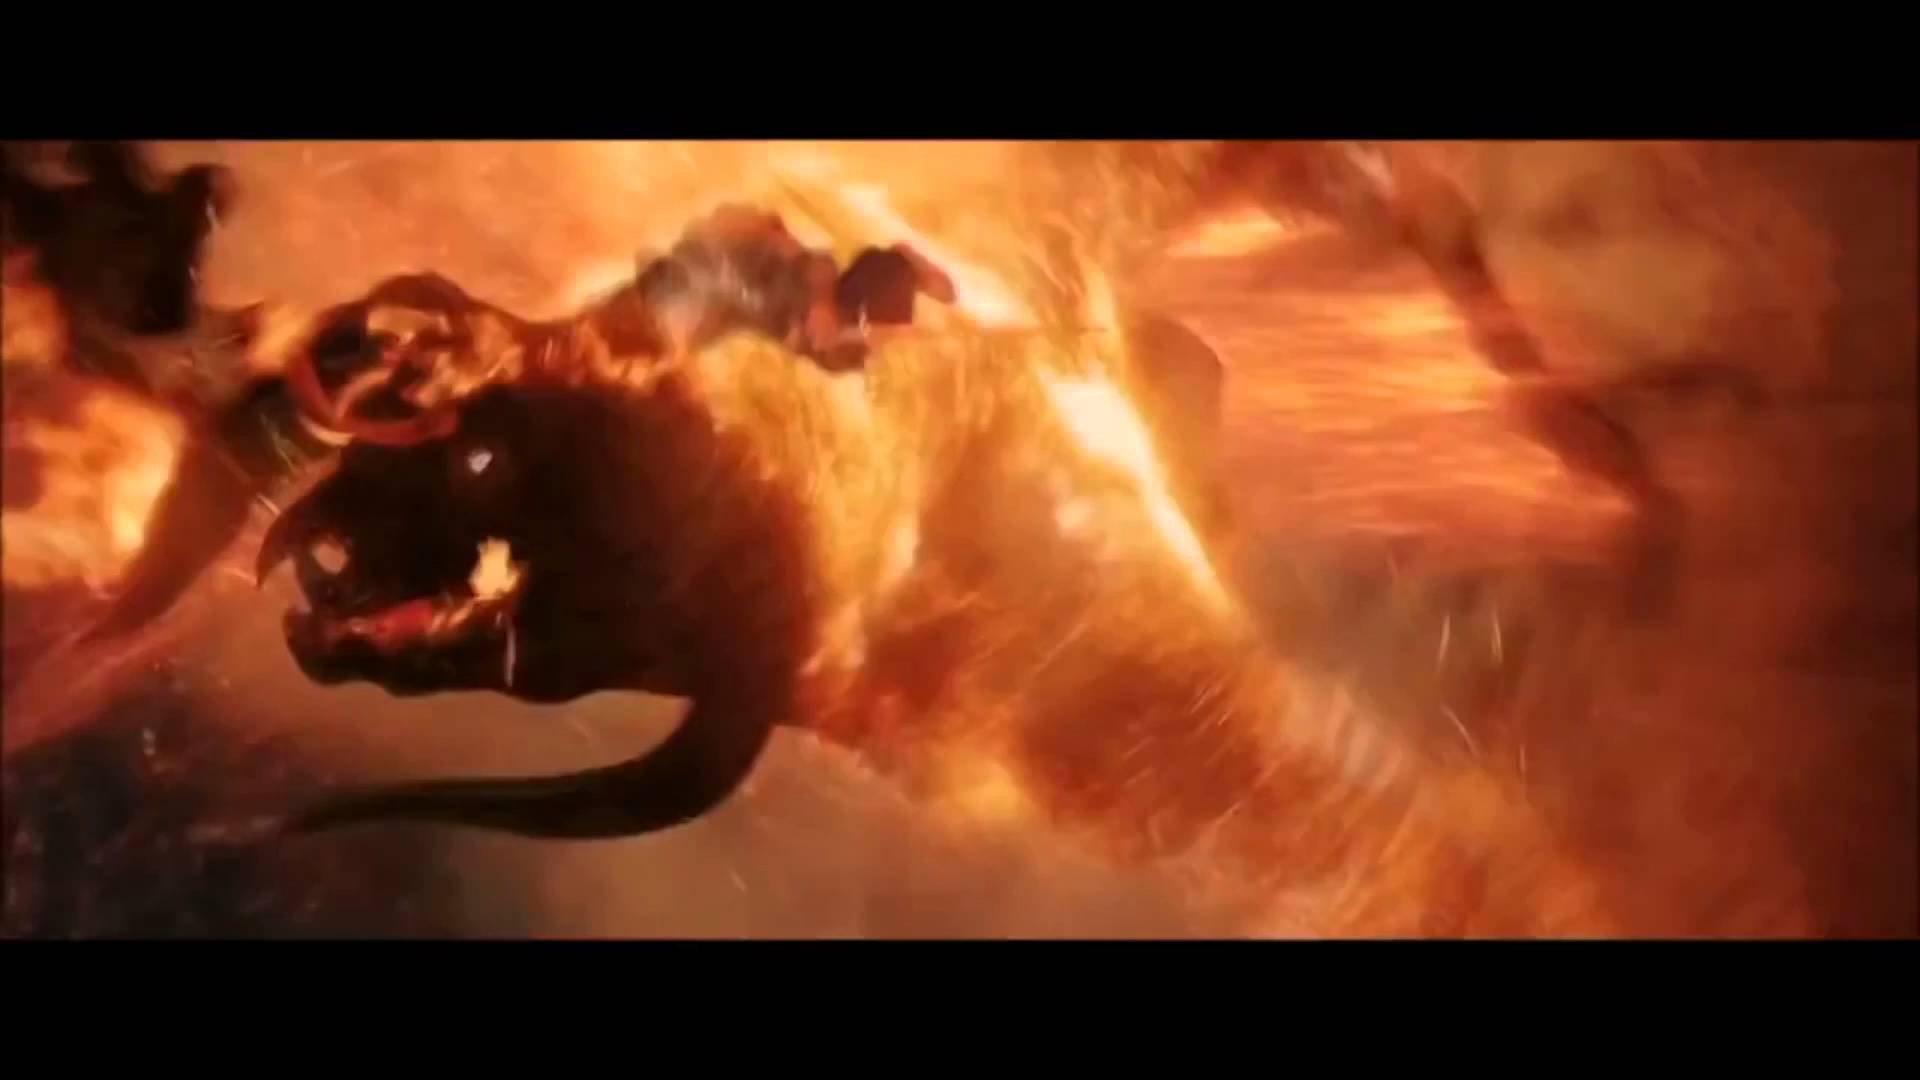 The true fall of Gandalf and the Balrog